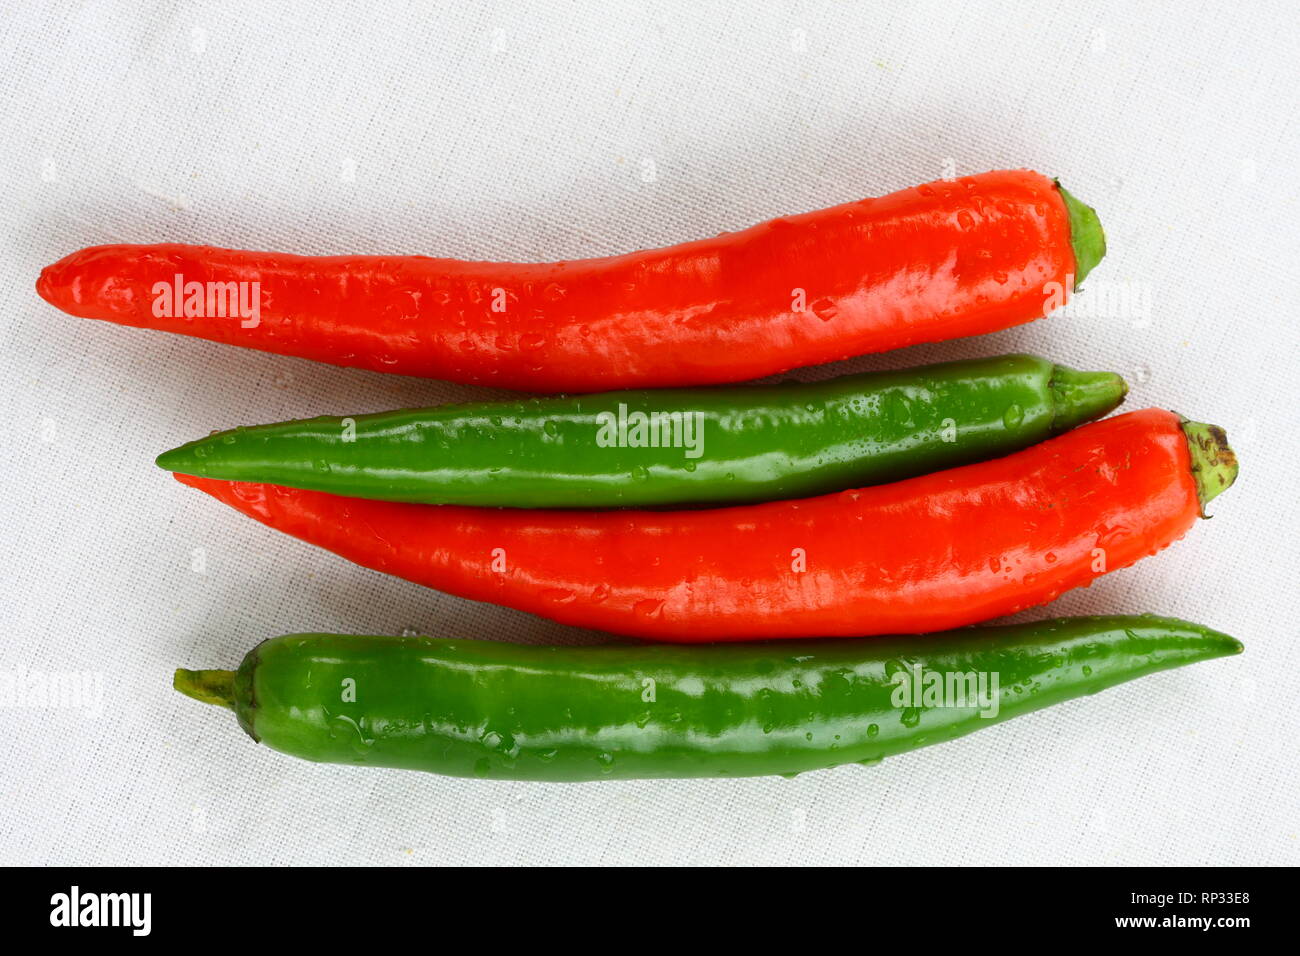 Red and green Thai chili peppers Stock Photo